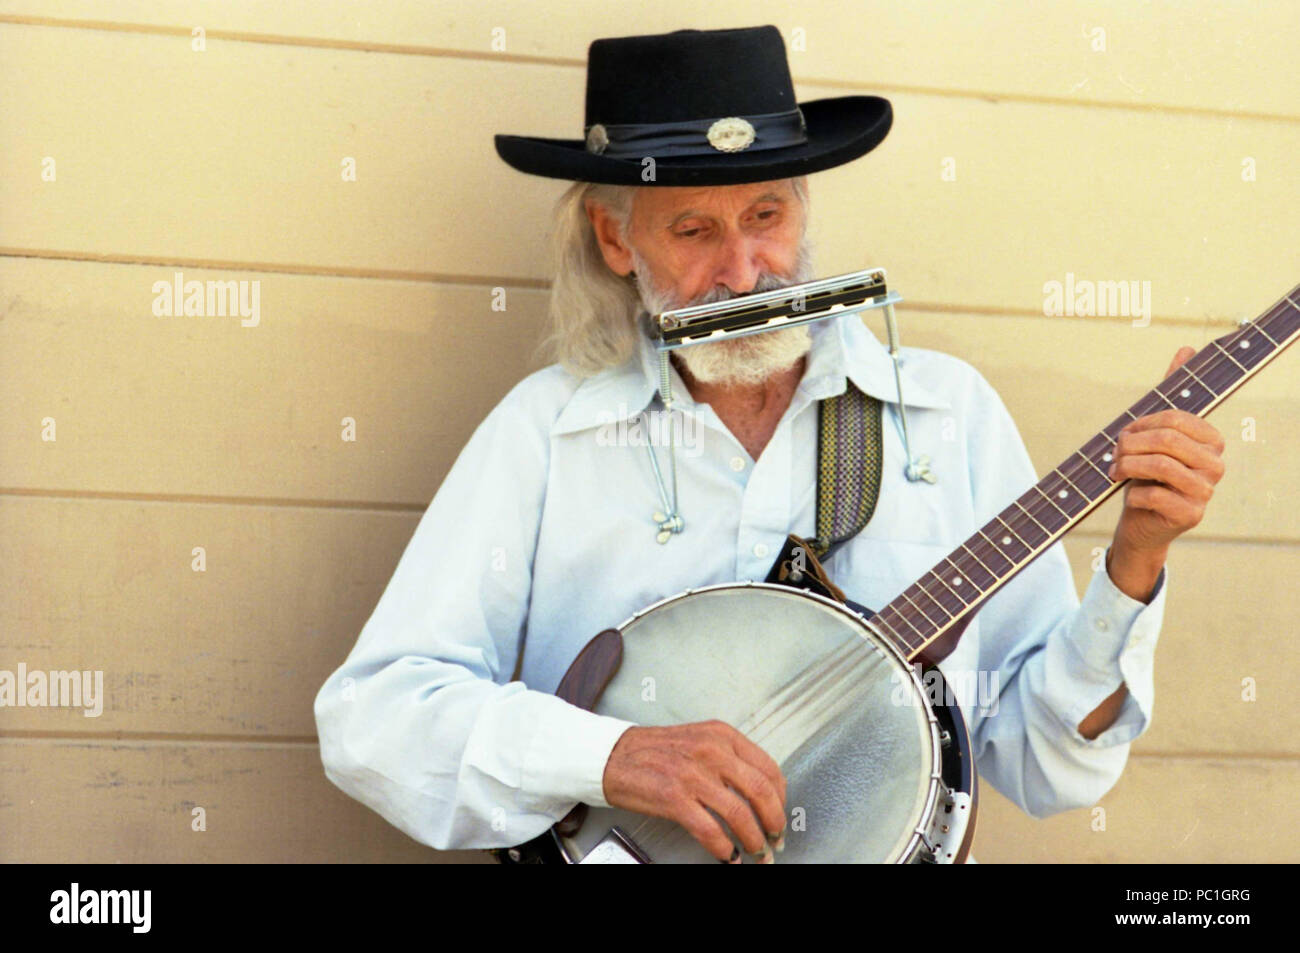 Man performing on the street, with banjo and harmonica Stock Photo